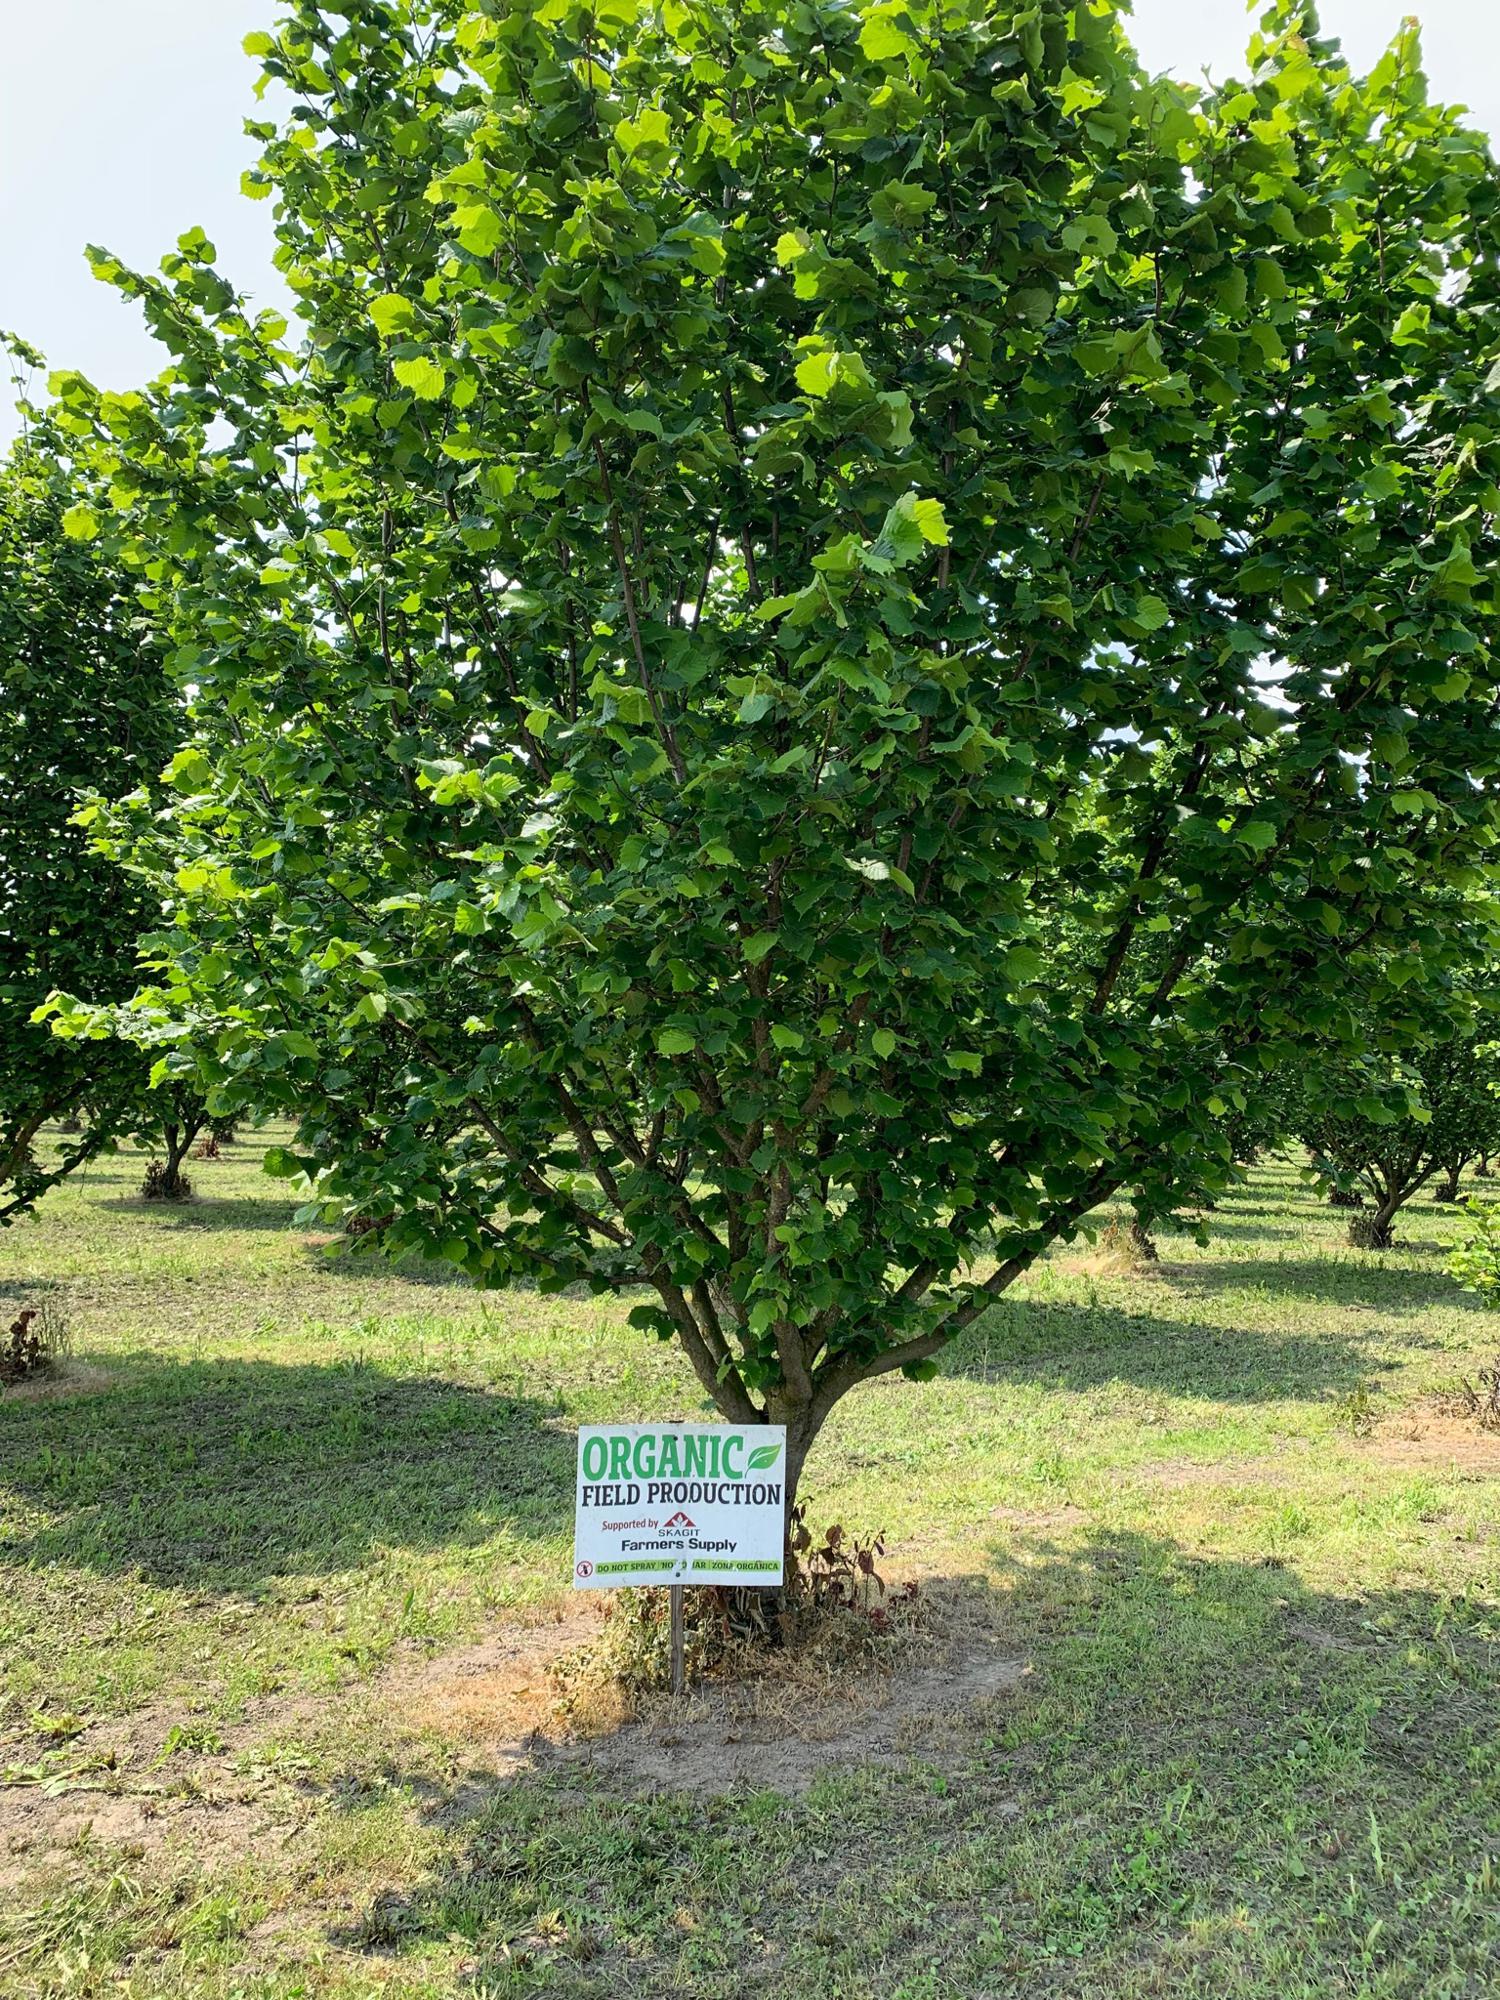 Hazelnut trees with organic sign in front of it